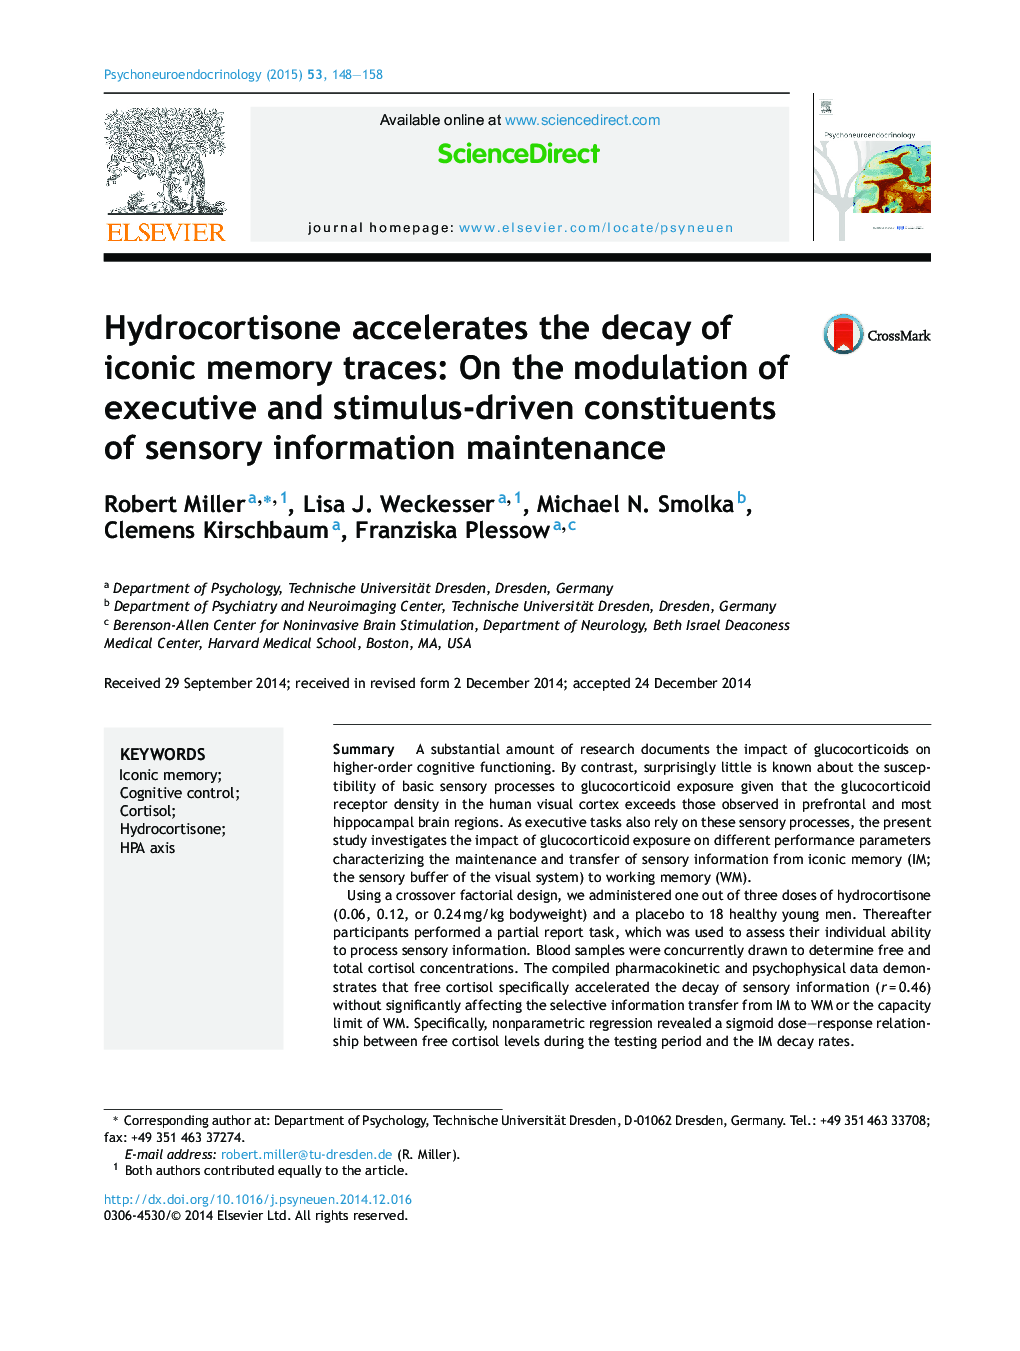 Hydrocortisone accelerates the decay of iconic memory traces: On the modulation of executive and stimulus-driven constituents of sensory information maintenance